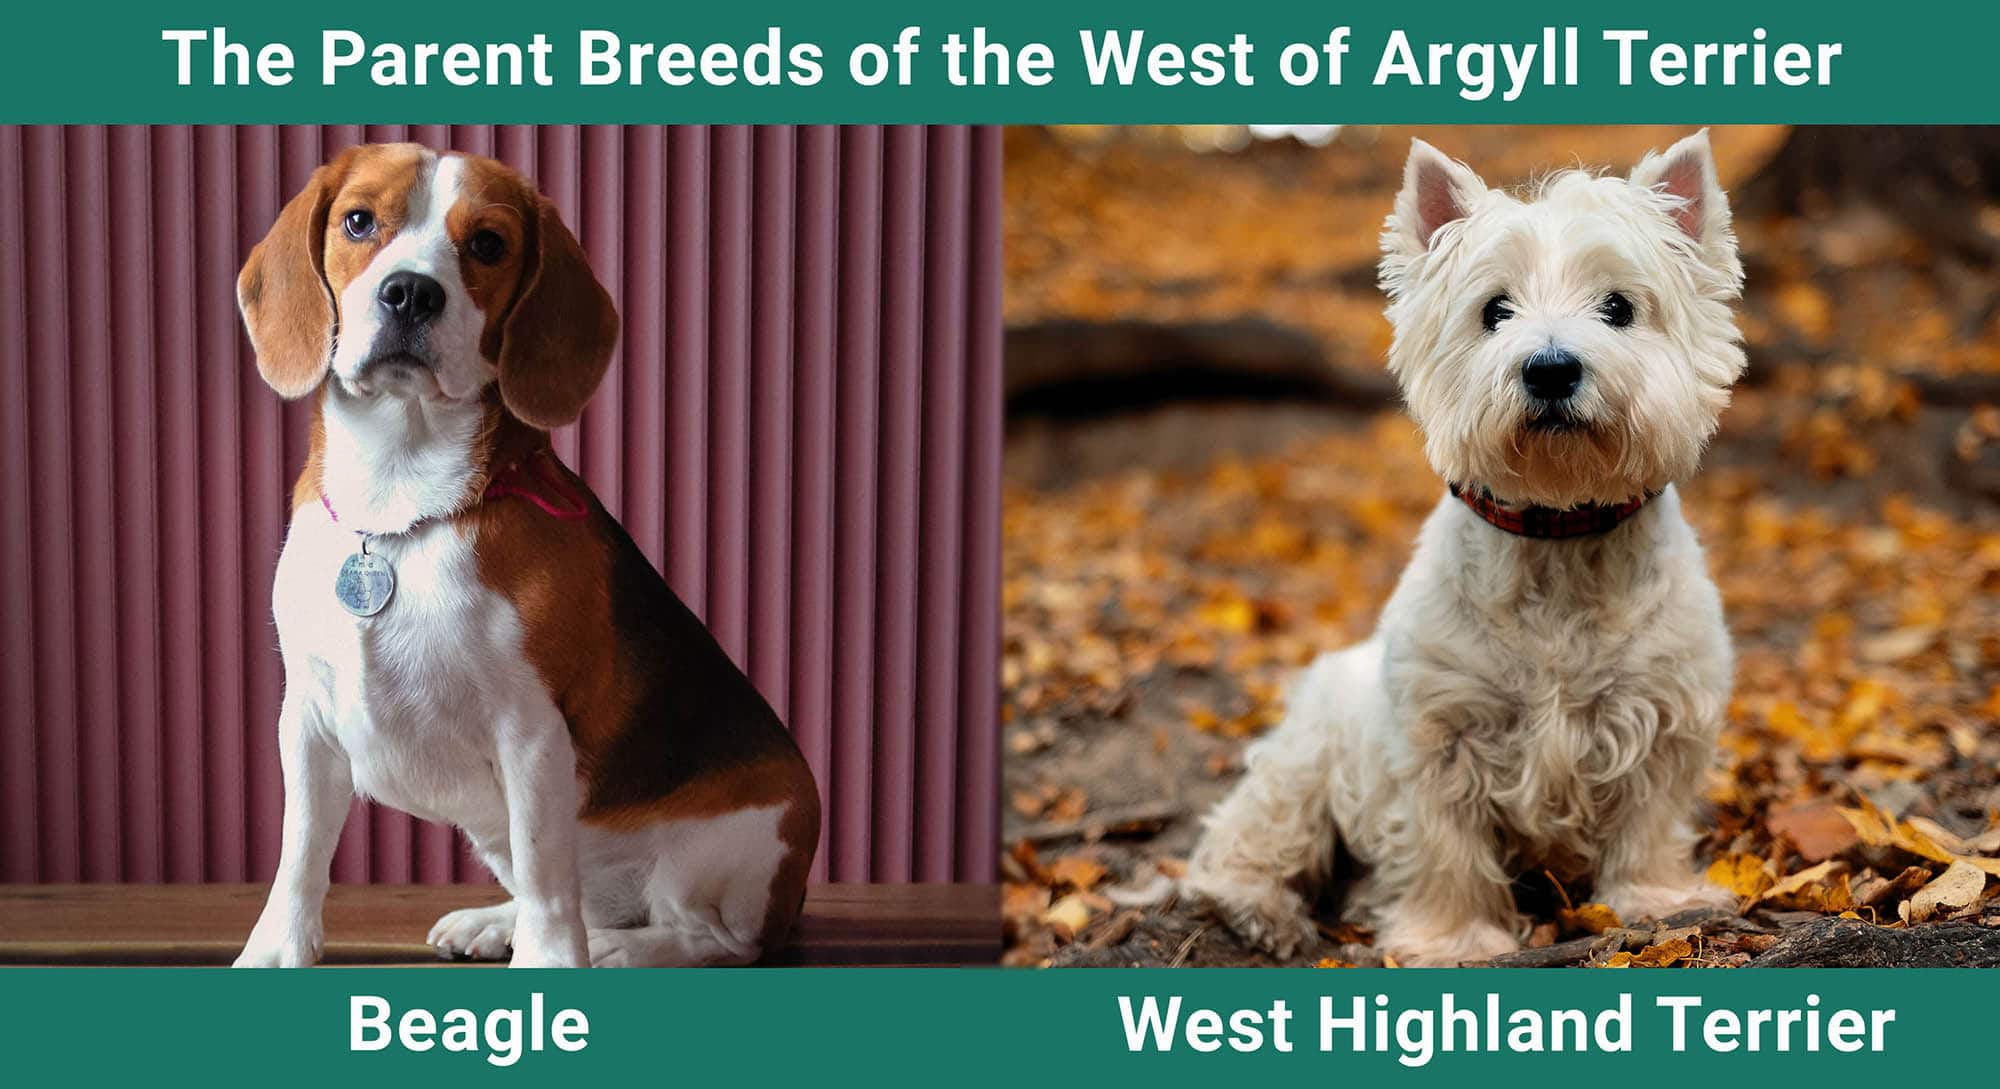 The Parent Breeds of the West of Argyll Terrier